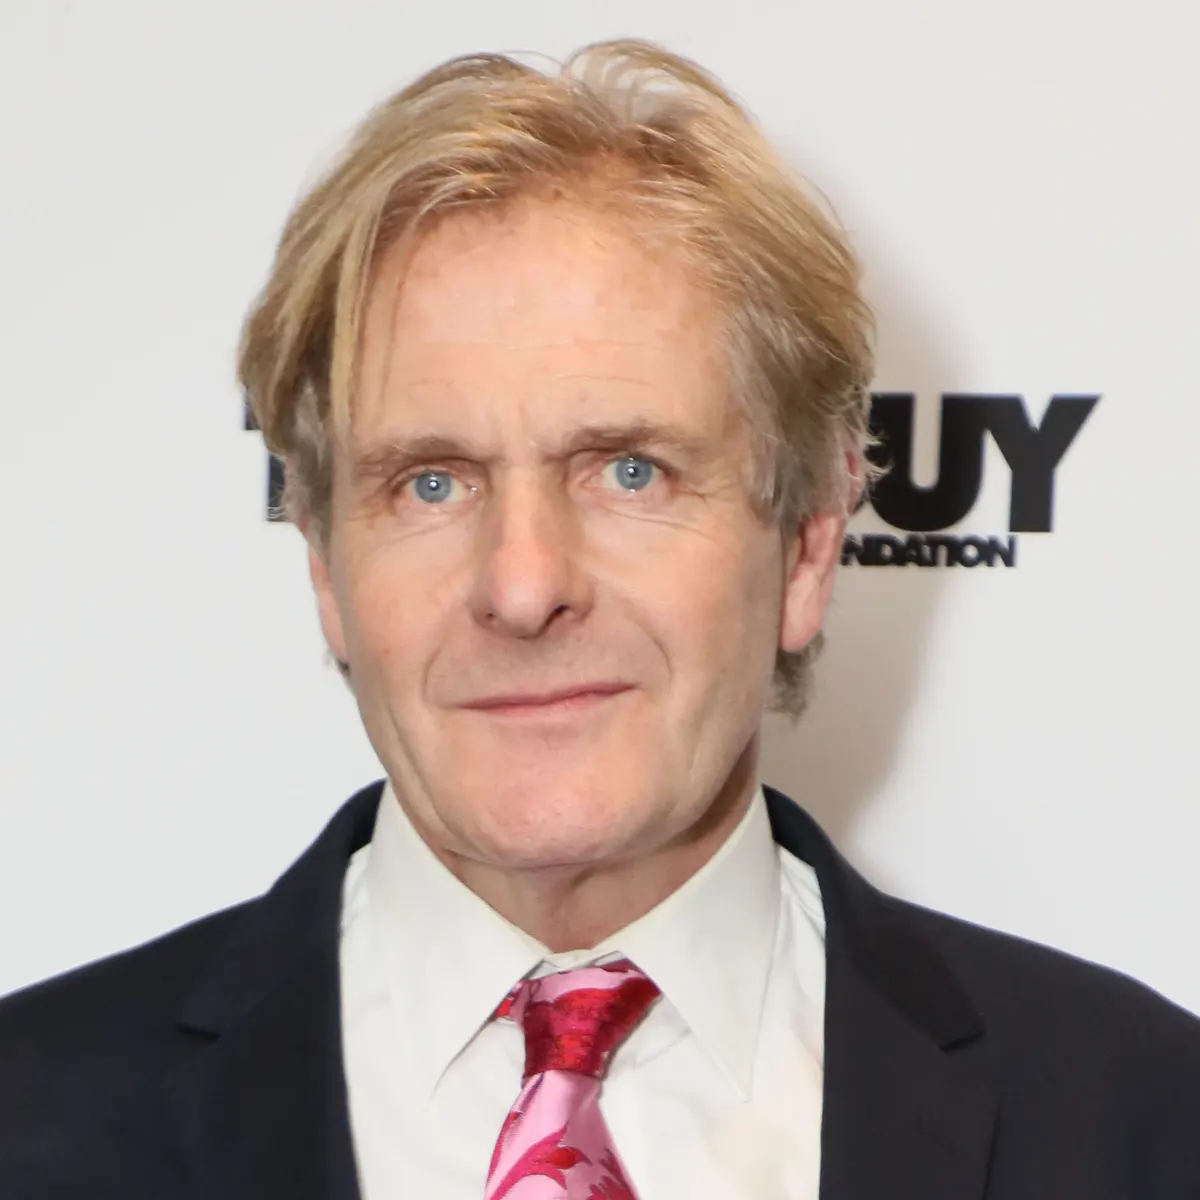 Books that altered my life, according to Robert Bathurst